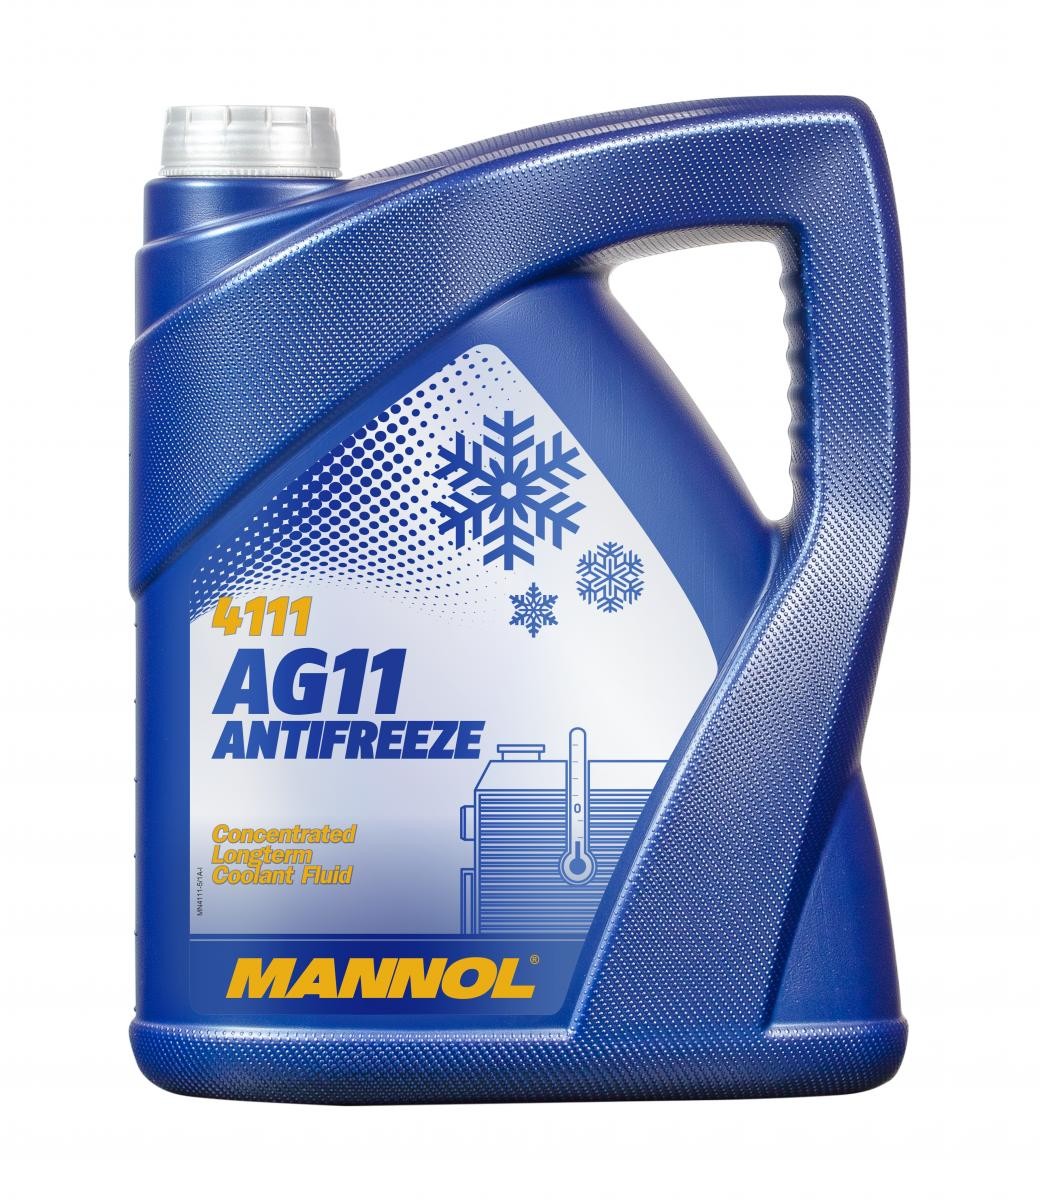 MANNOL MN4111-5 Antifreeze VW experience and price